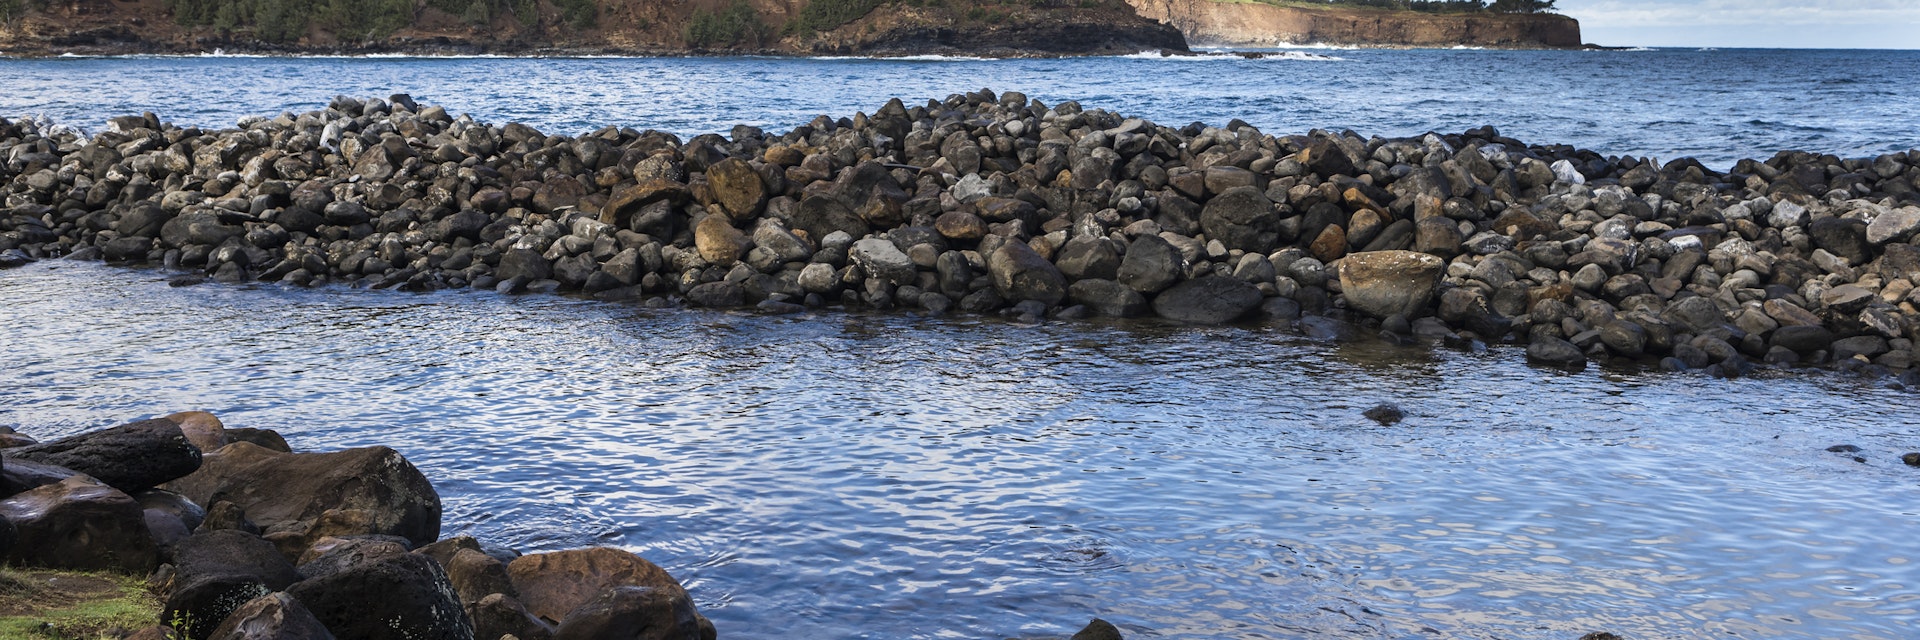 Keokea, Hawaii - December 30, 2017: View of the coastline, with a huge dock of rocks and the cliffs in the background.
1302438780